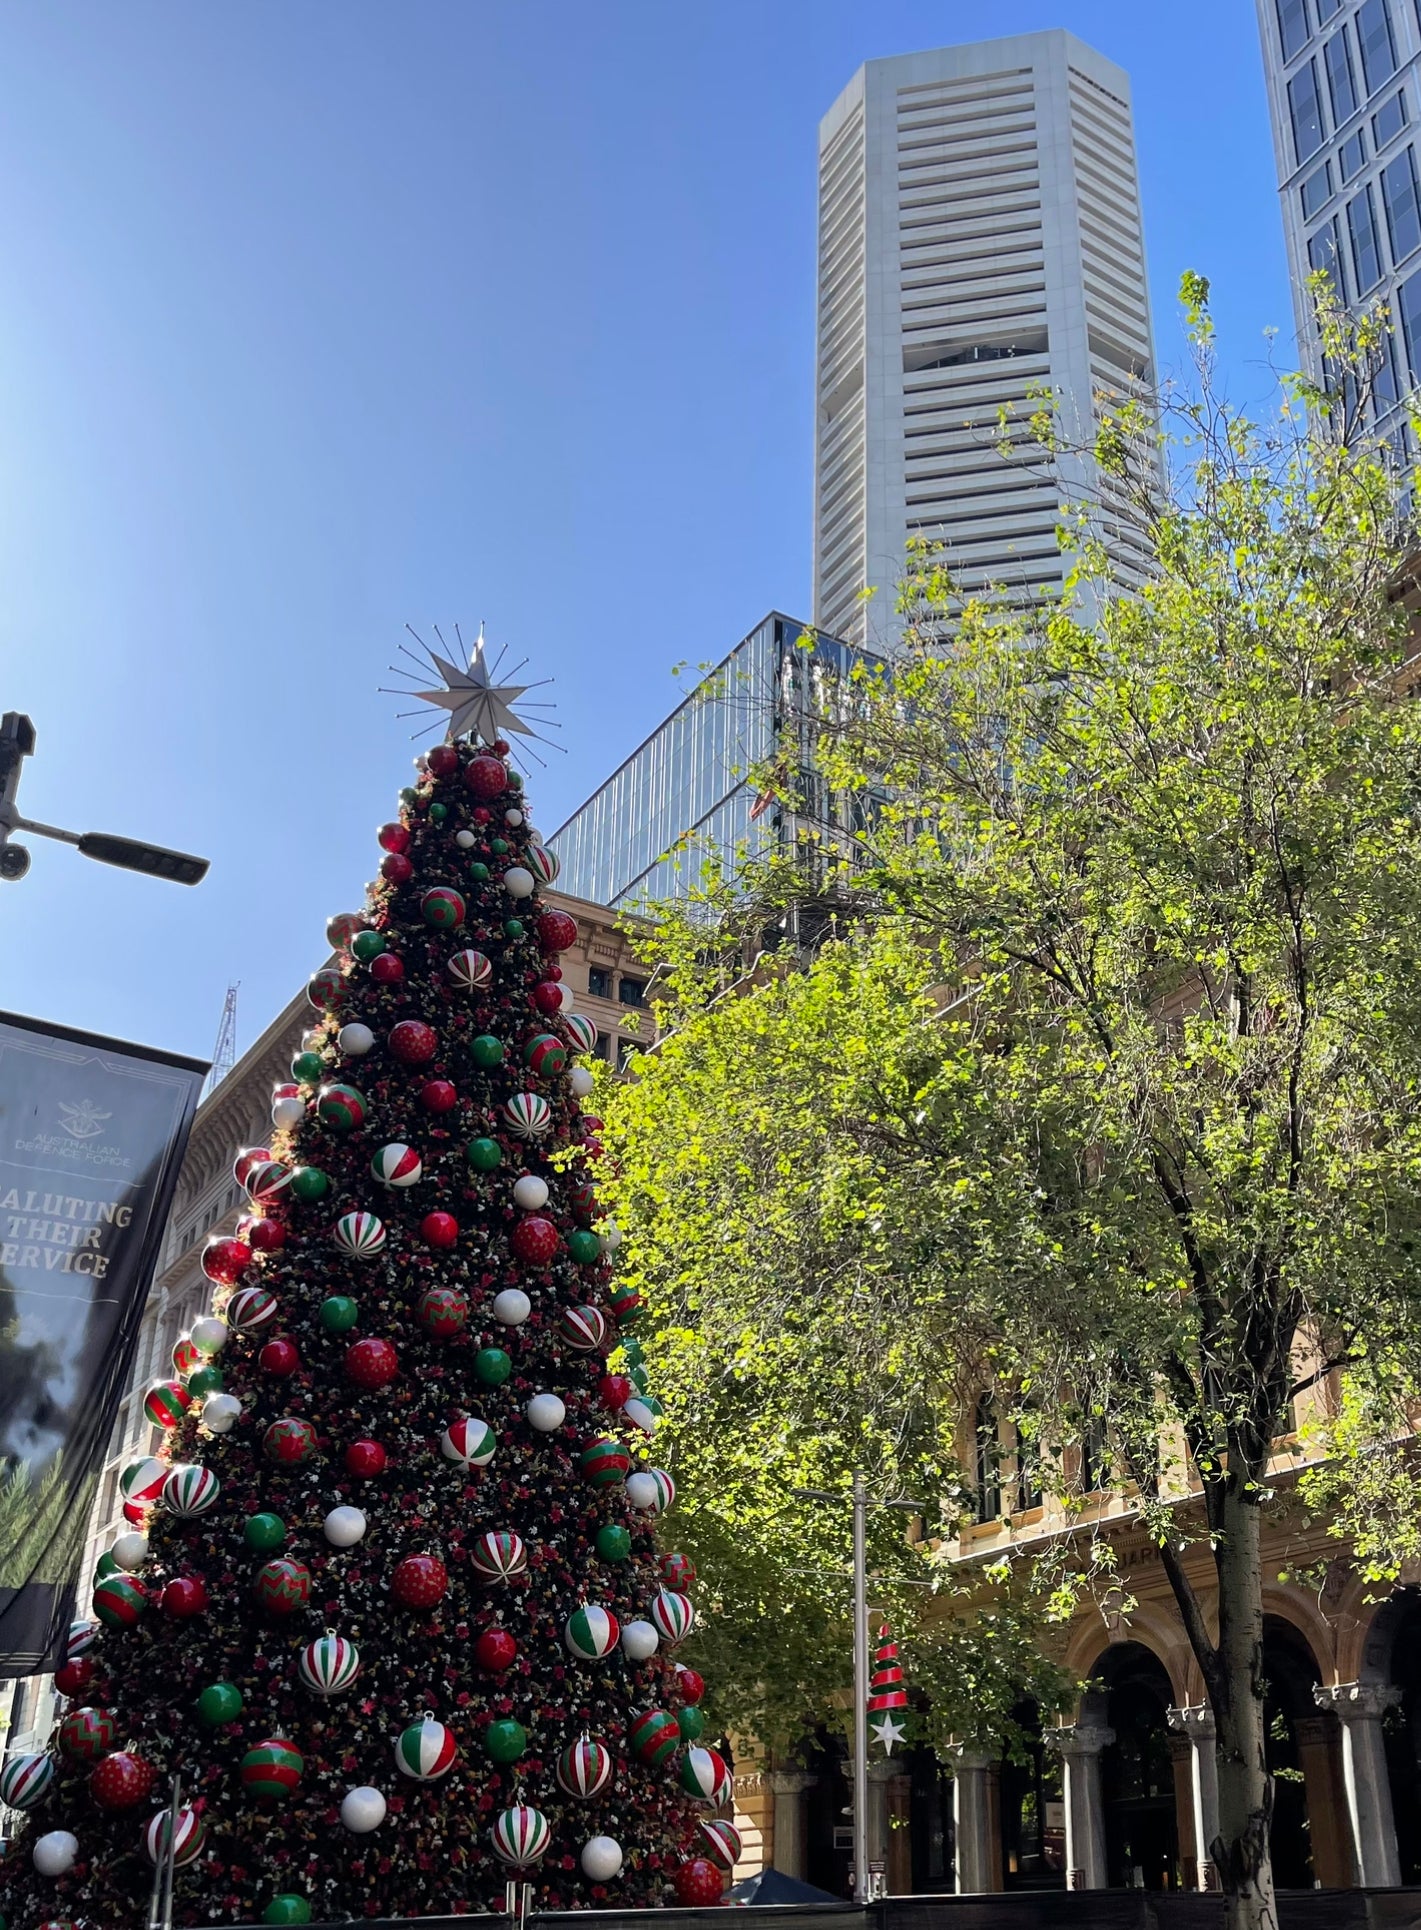 Our Christmas Tree in Sydney